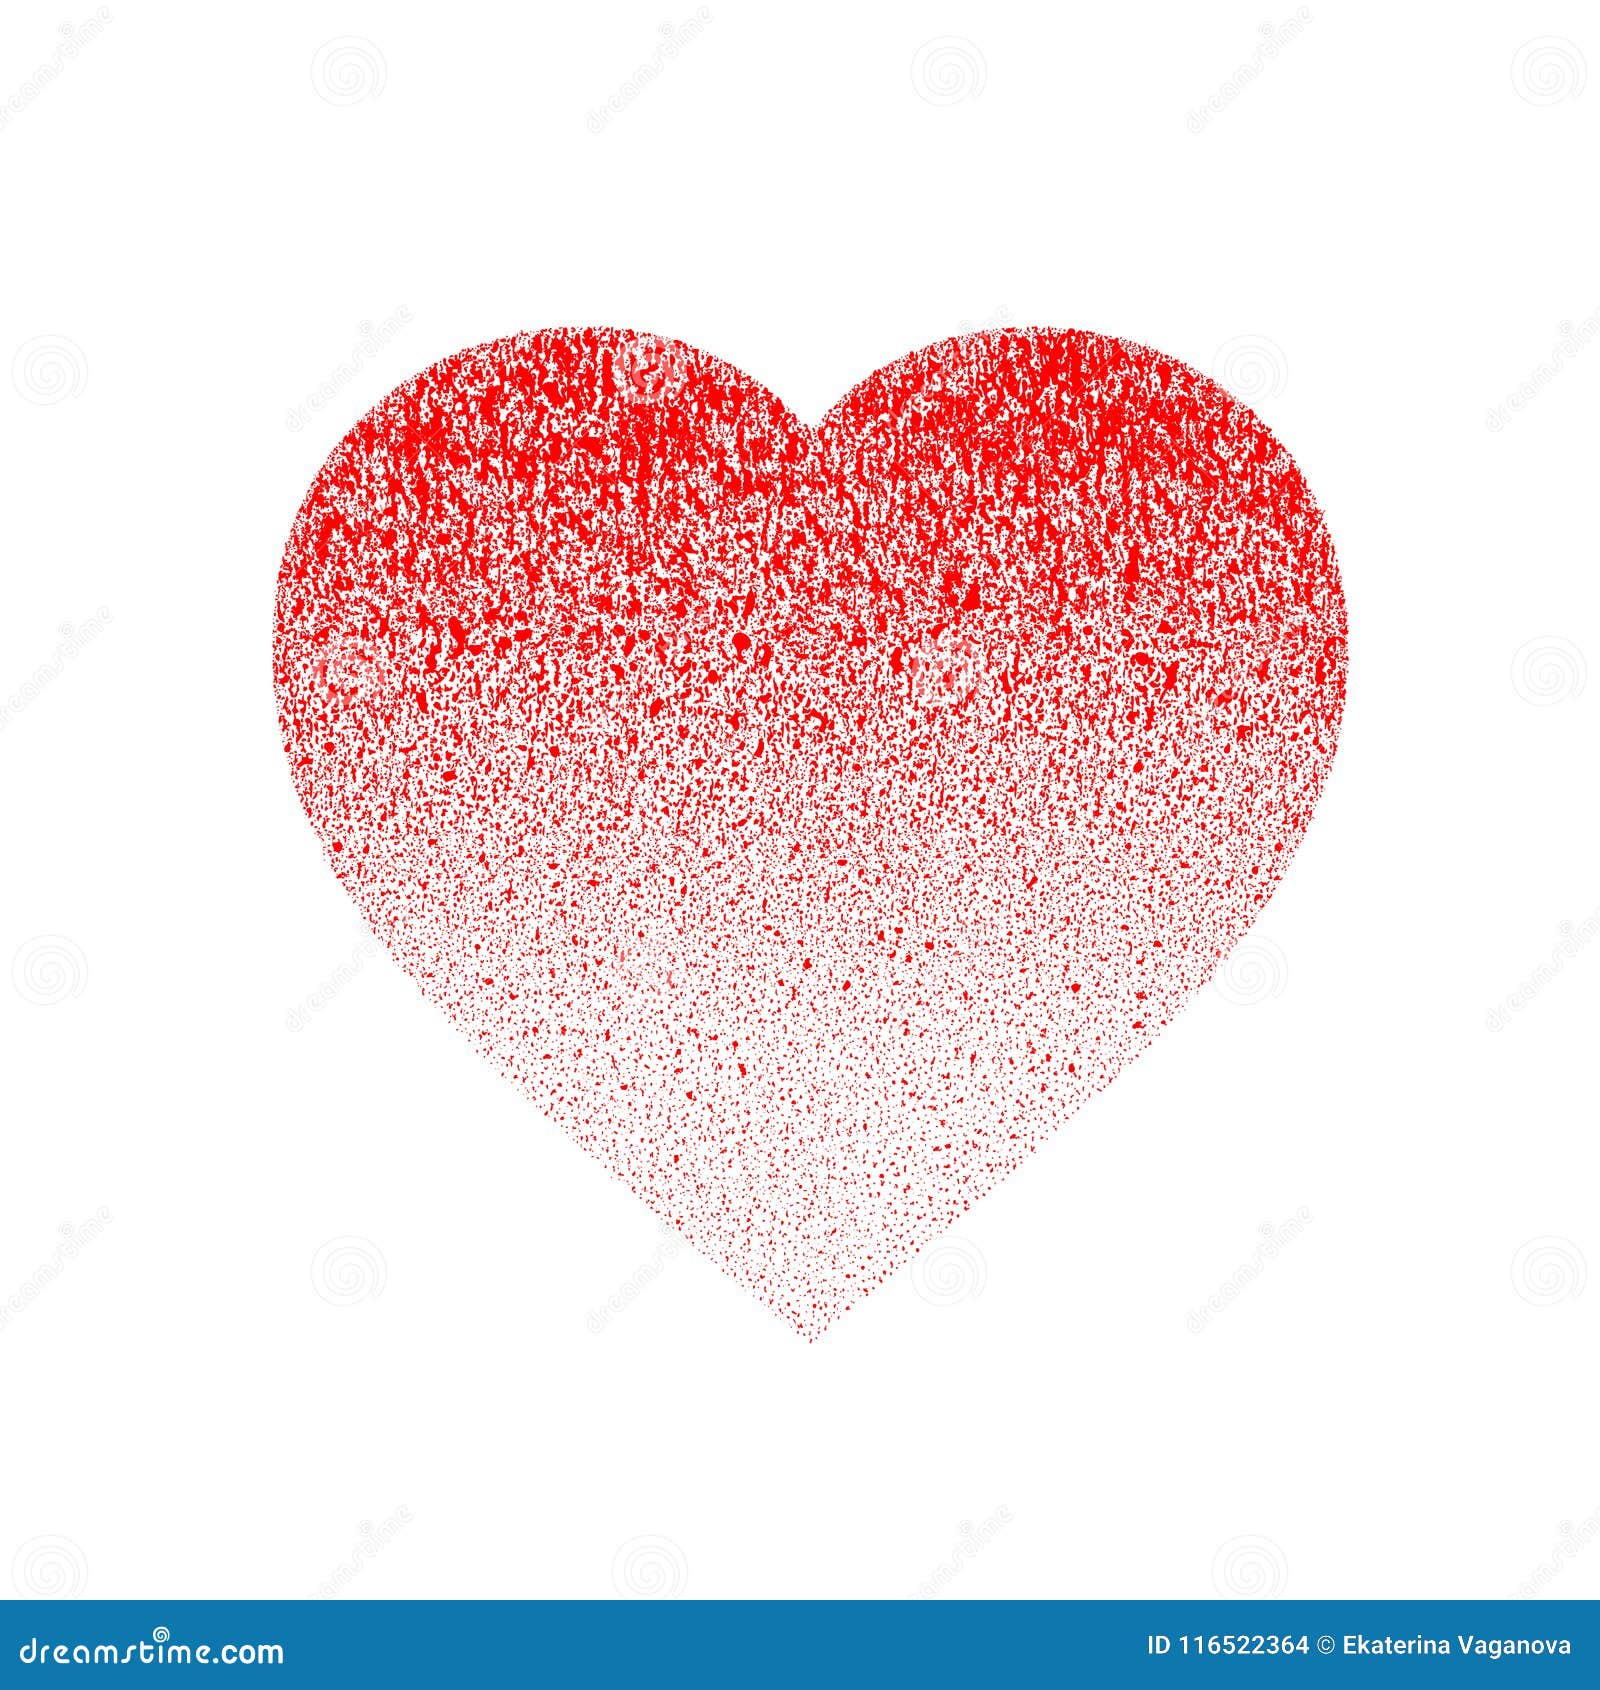 red grunge distressed textured hand made heart made of paint spray with drops, dribble, sprinkle. halftone from scarlett to light